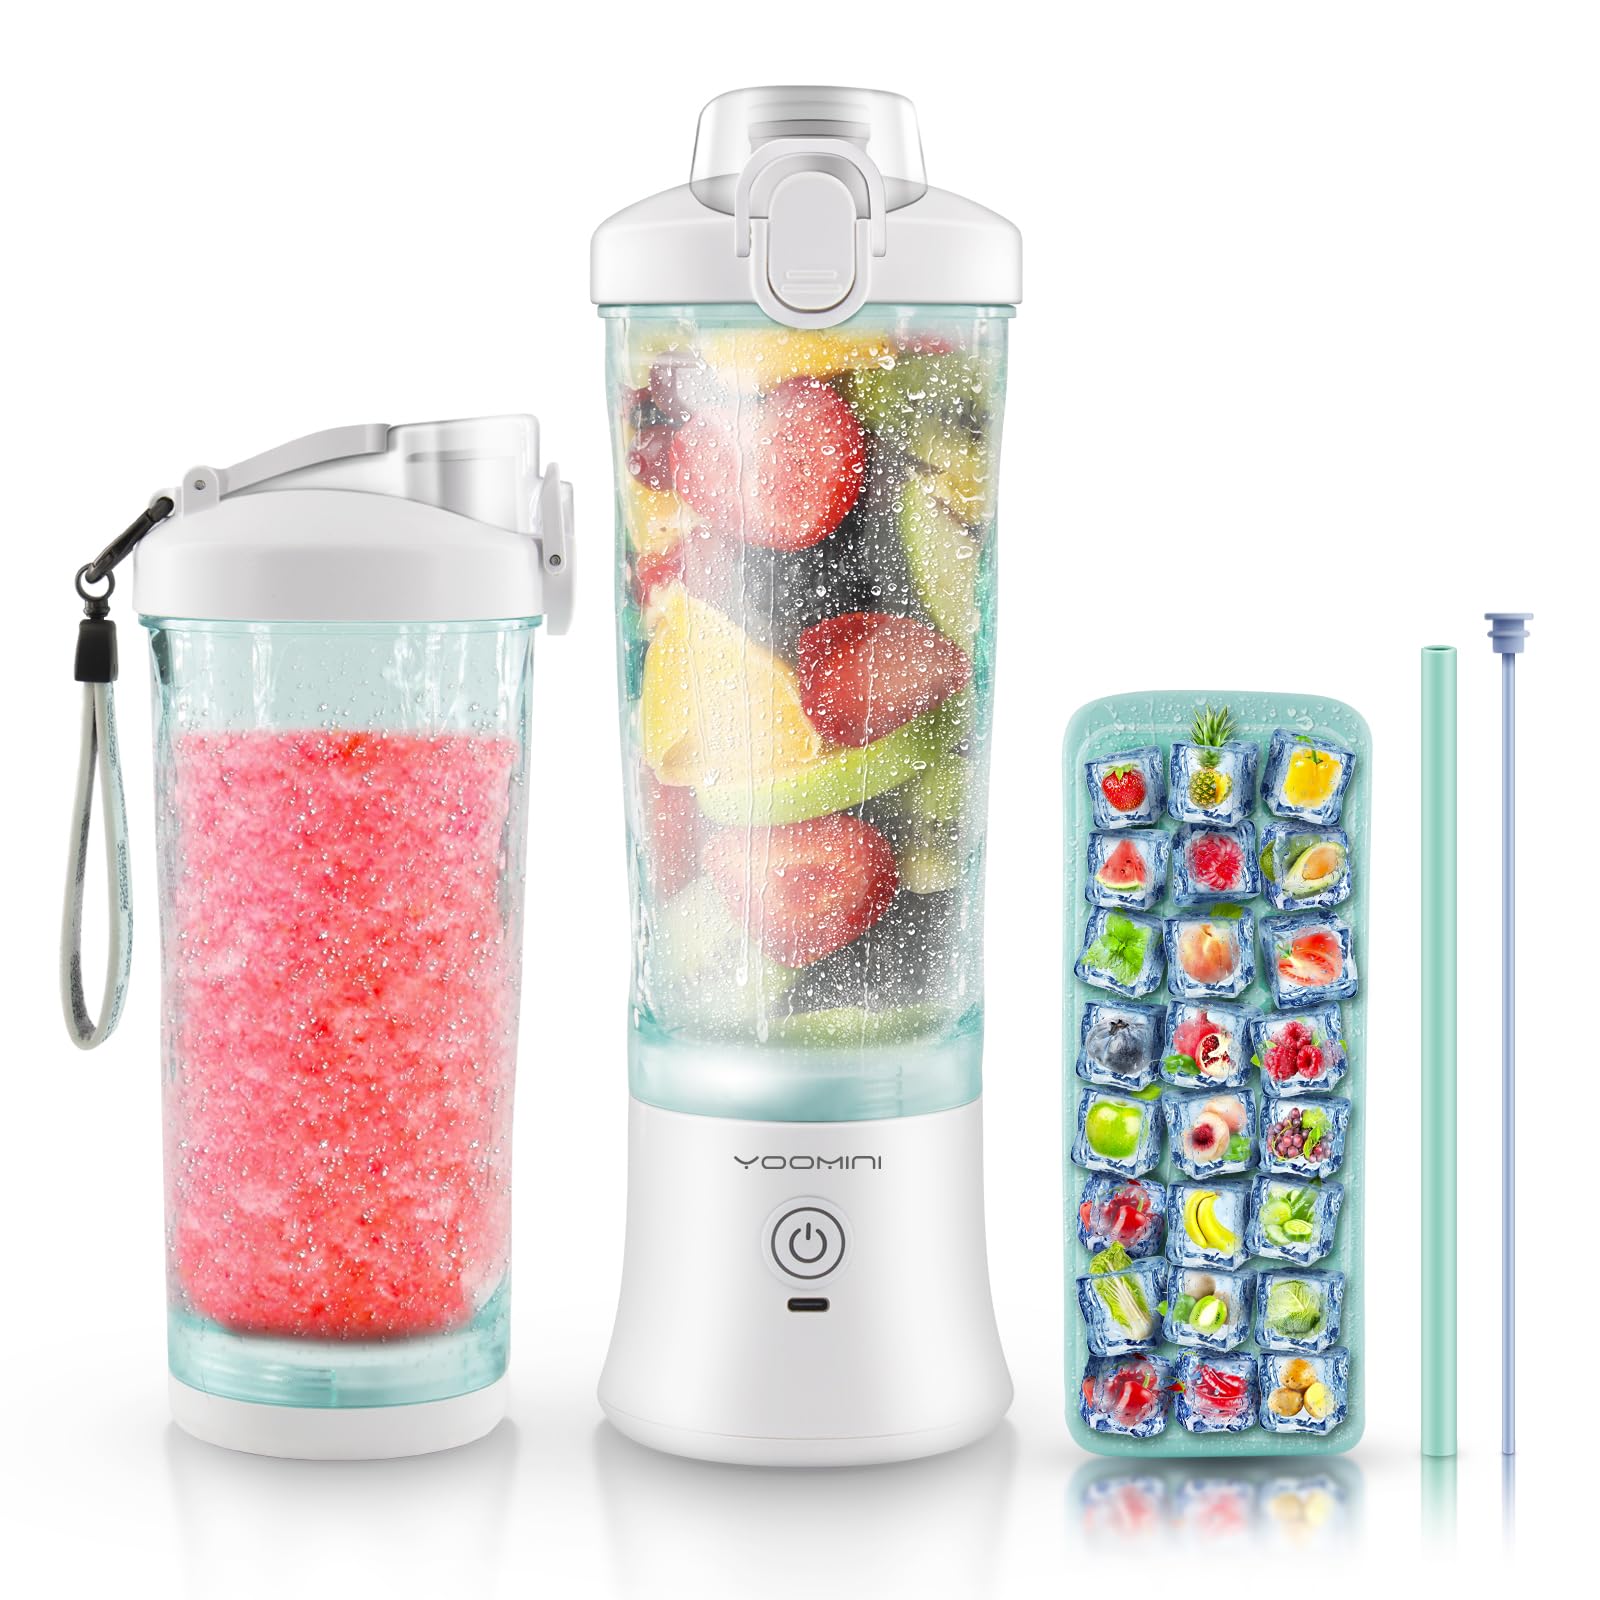  Personal Portable Blender for Shakes and Smoothies